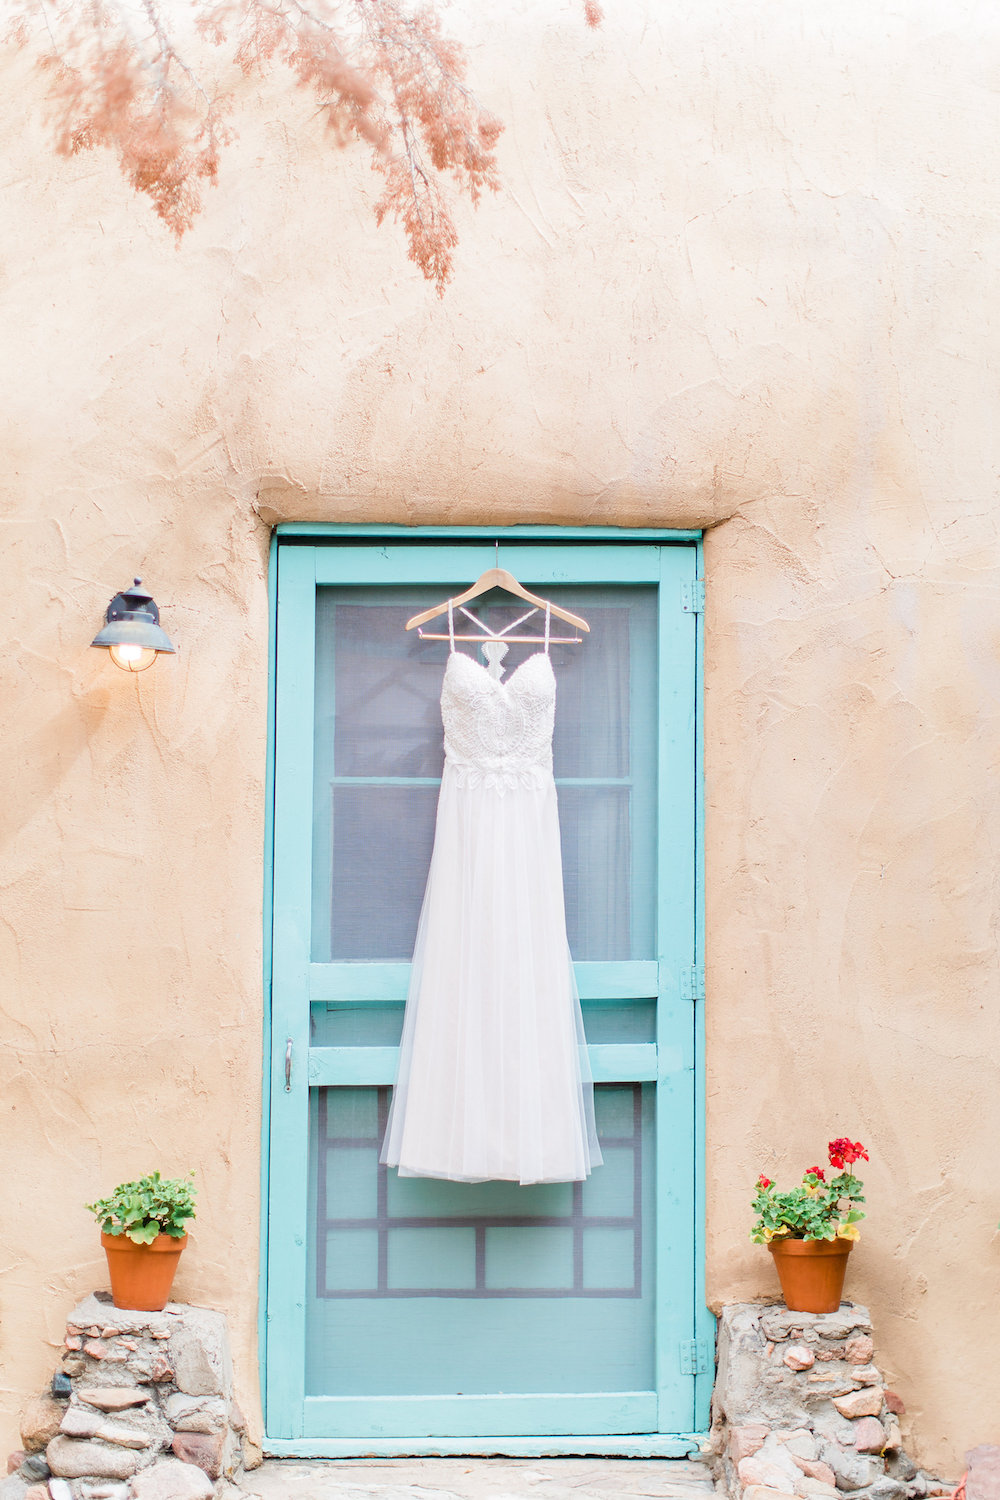 View More: http://chrisikphotography.pass.us/tyler--abbys-newmexico-elopement